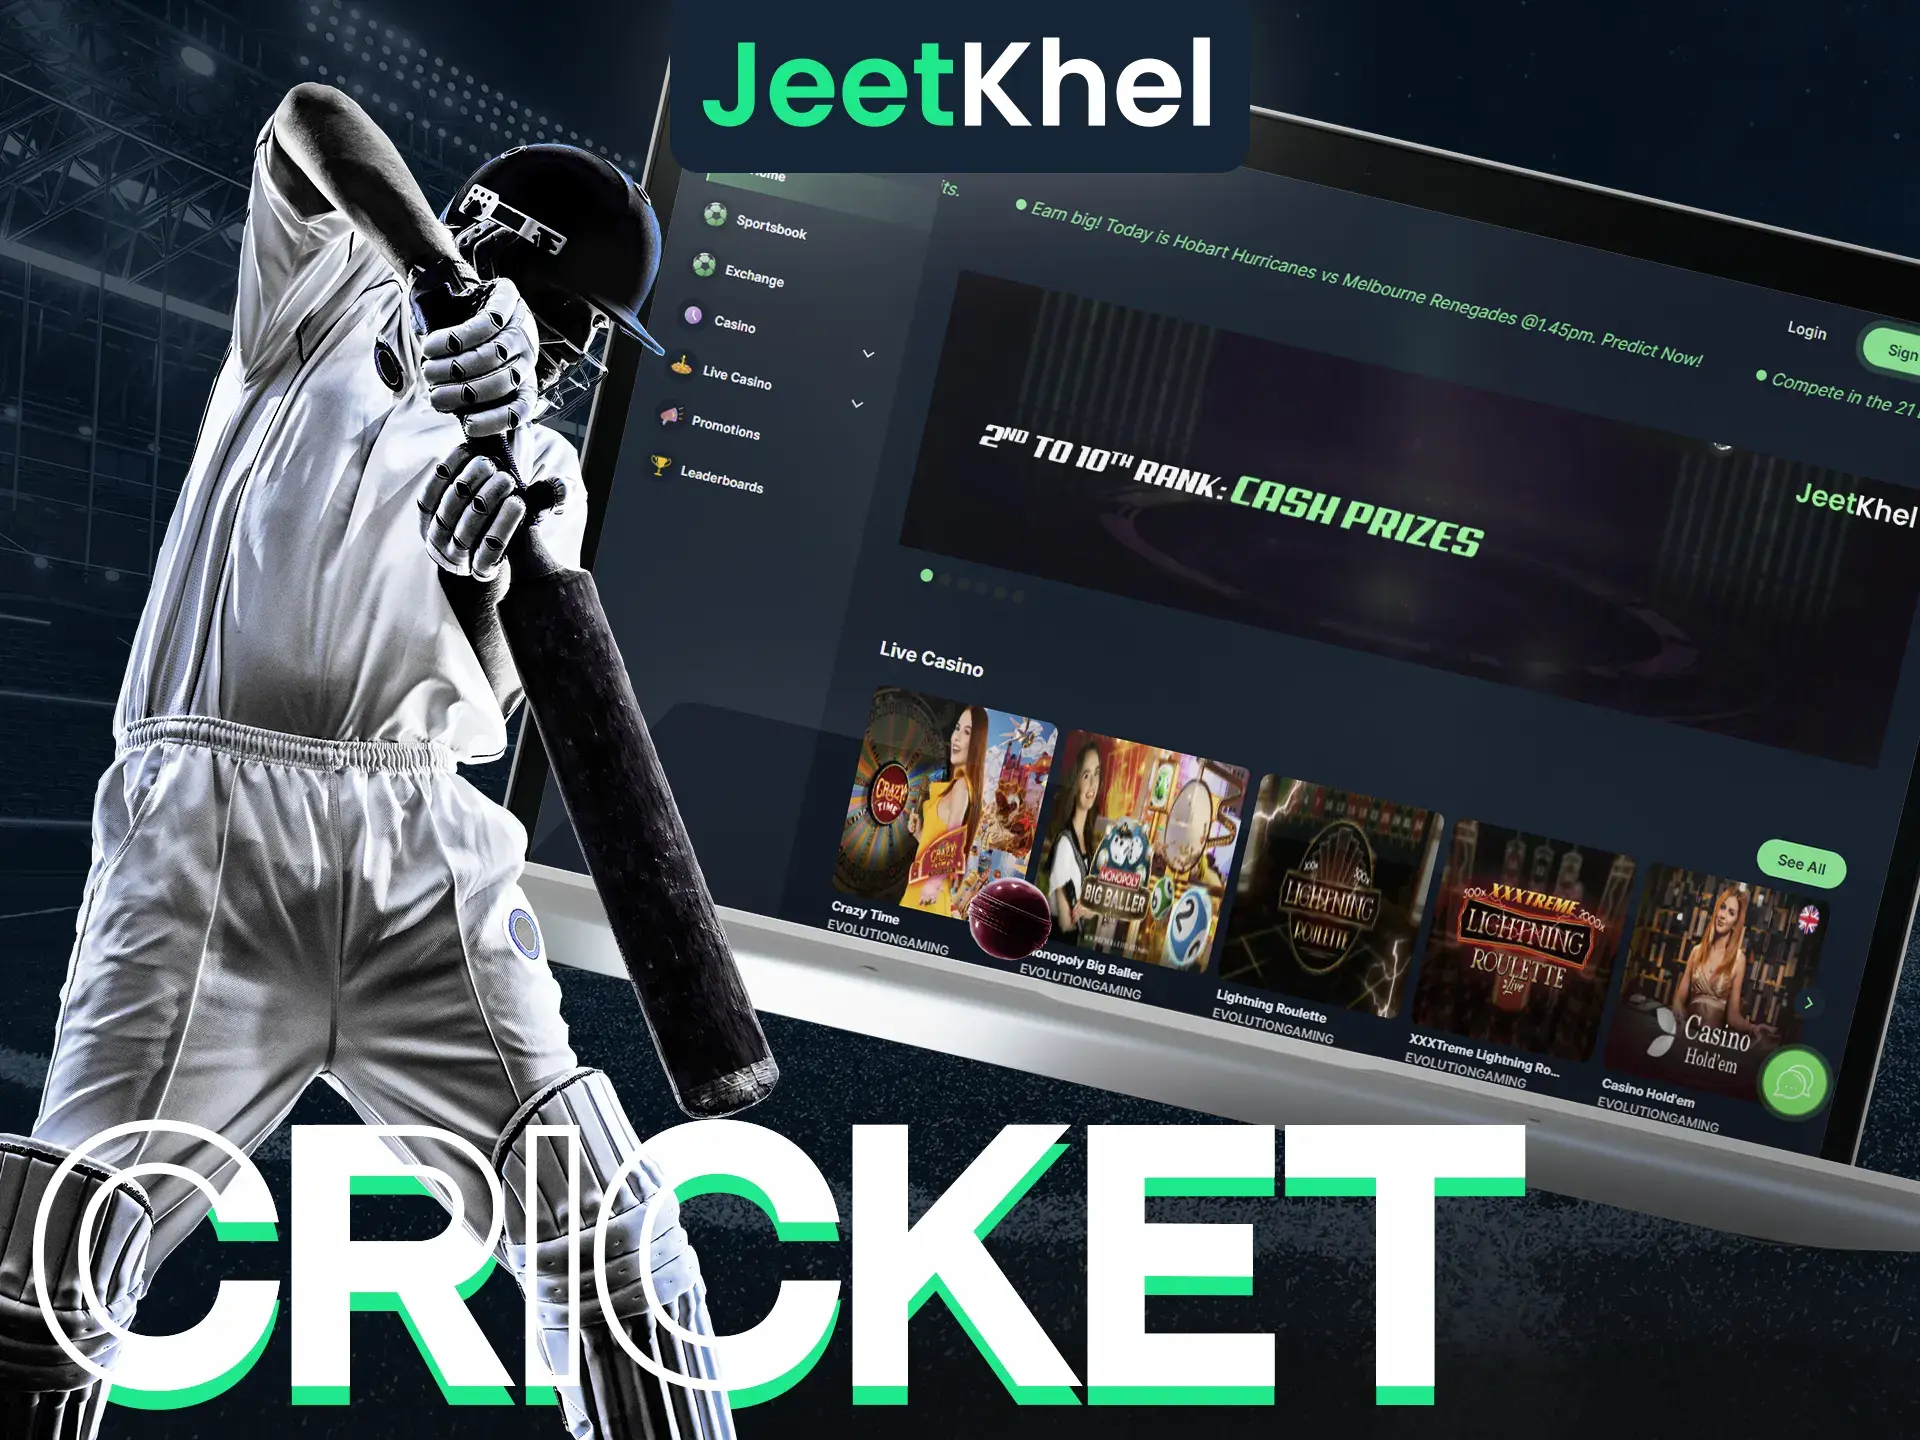 Place your cricket bets with Jeetkheel.